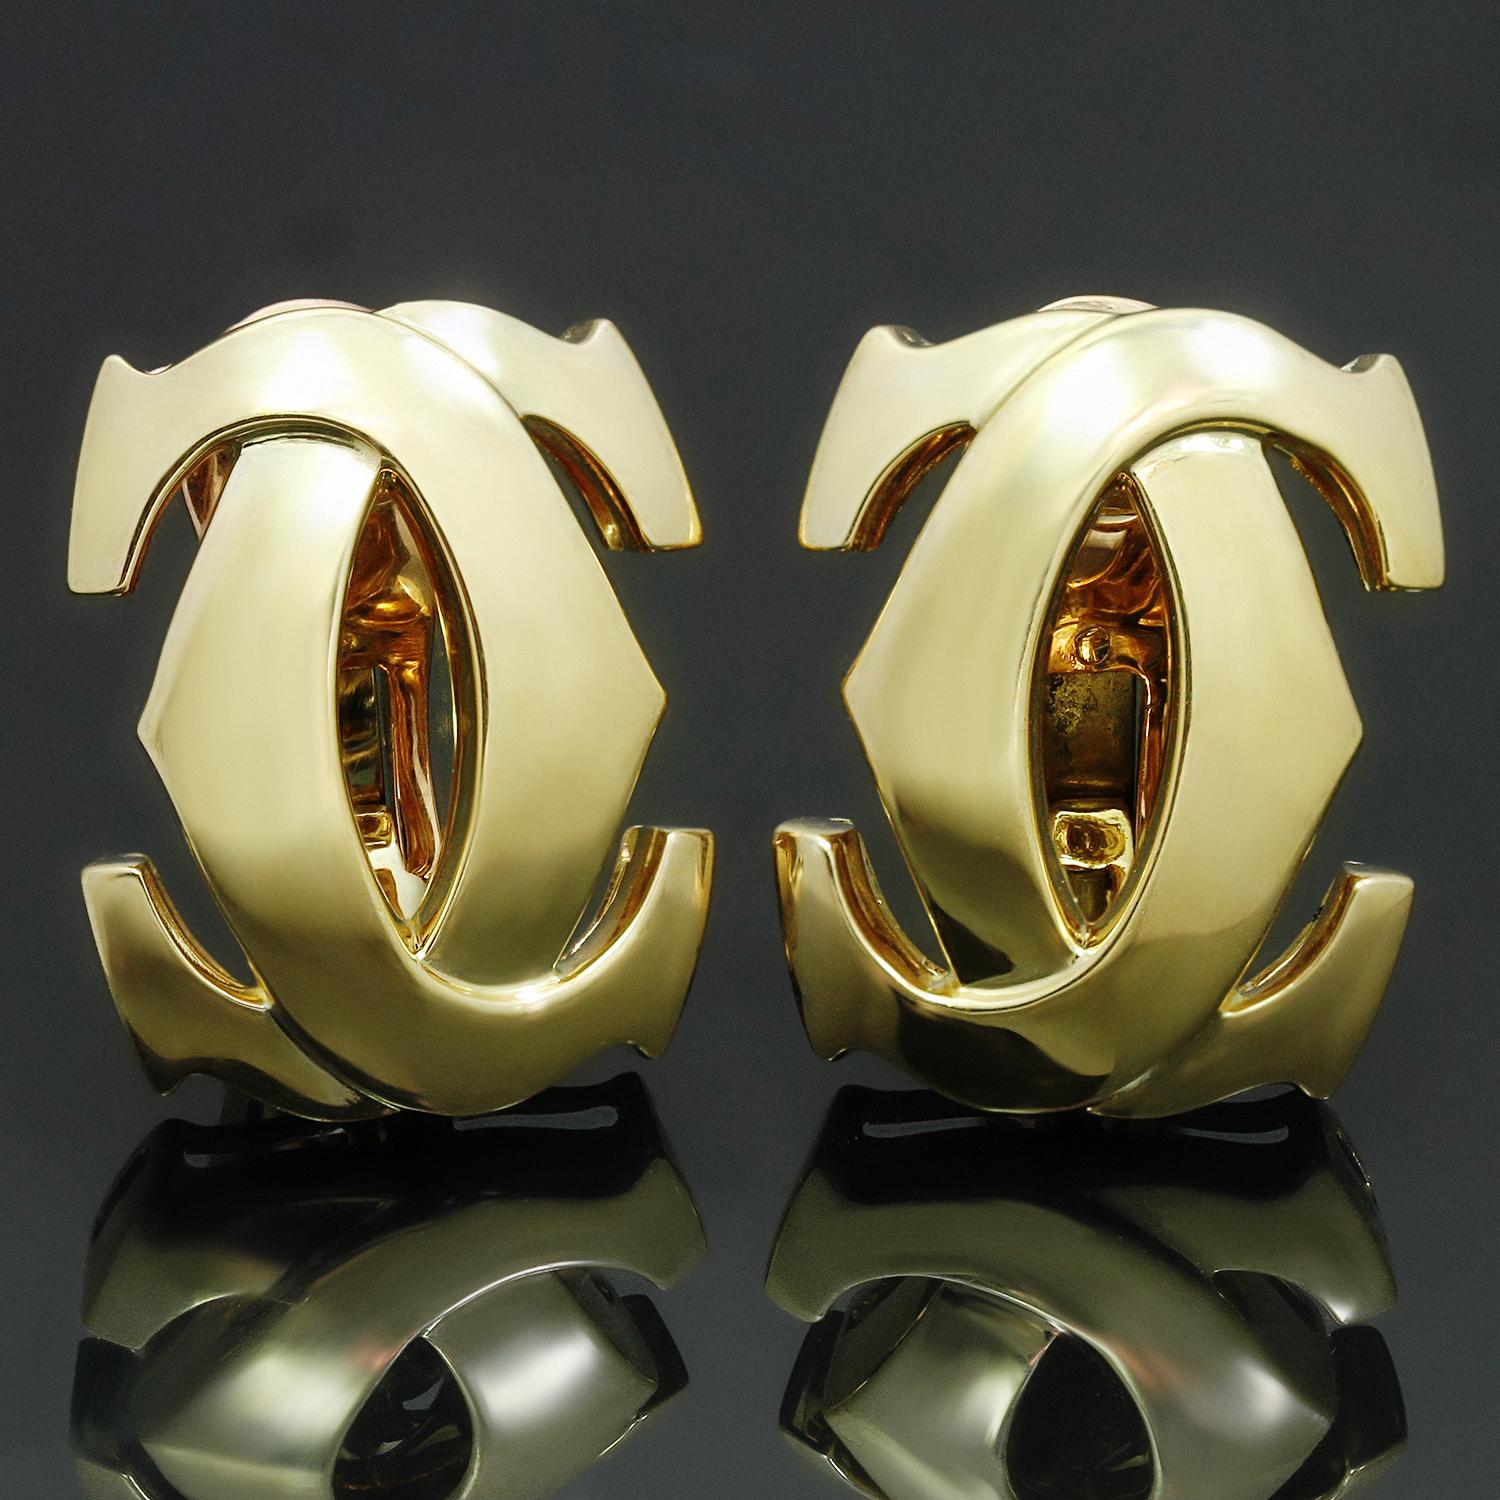 Iconic Cartier earrings featuring the Double C design crafted in 18k yellow gold. Classic and fabulous! These earrings have clip-on backs but posts can be added upon request for pierced ears at no extra charge. Made in France circa 1990s.